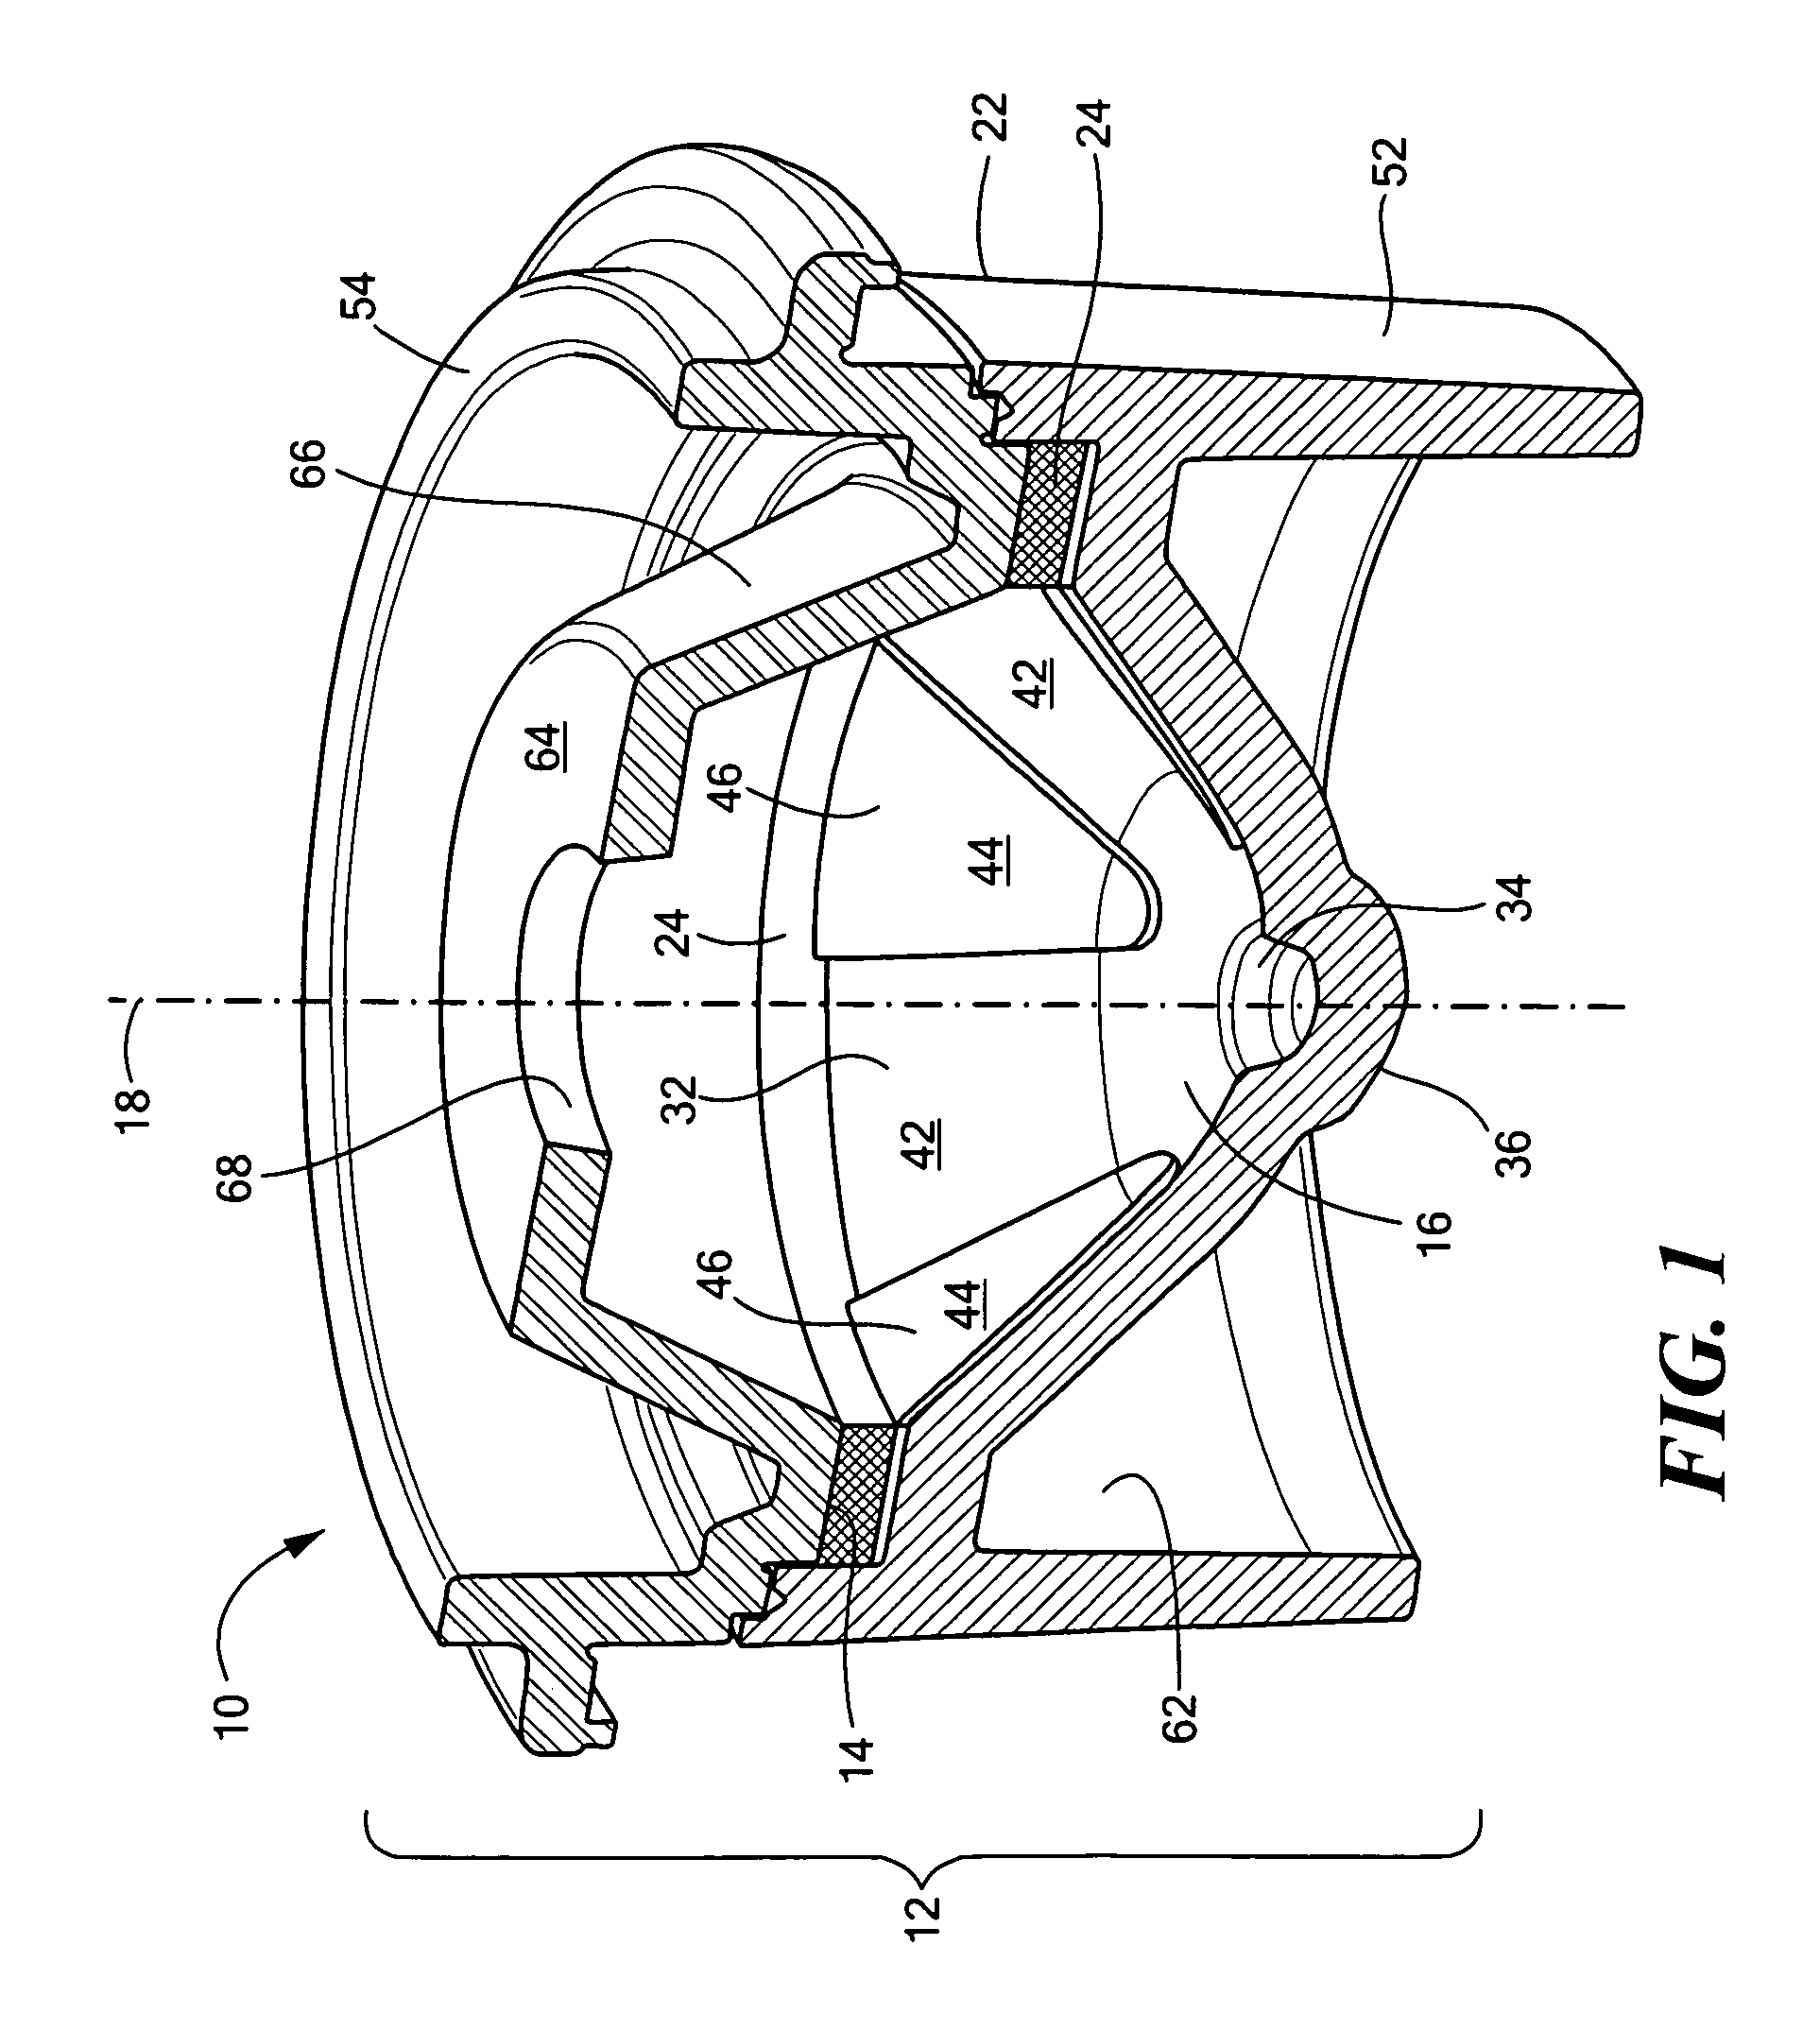 Centrifugal device and method for fluid component separation